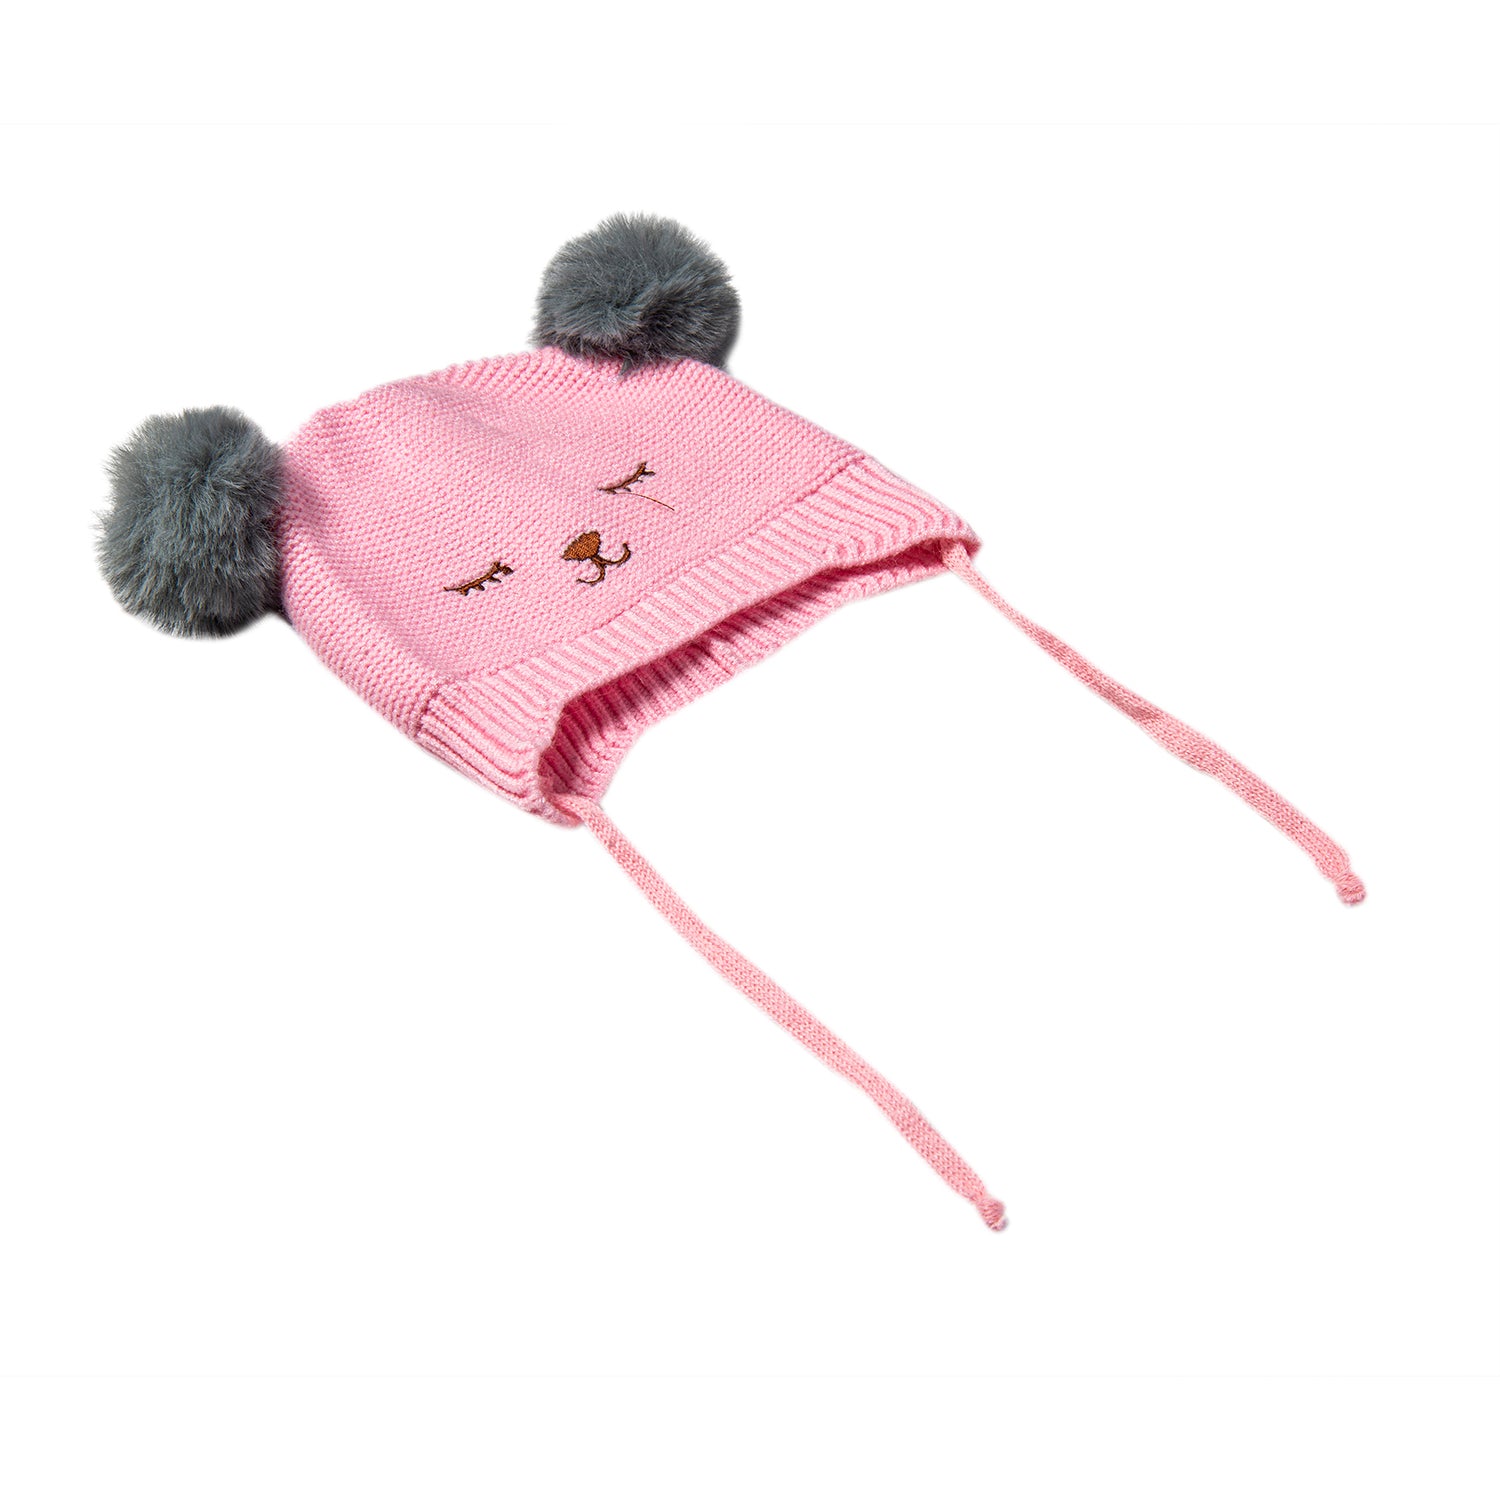 Knit Woollen Cap With Tie Knot For Ear Cover Sleeping Pom Pom Pink - Baby Moo